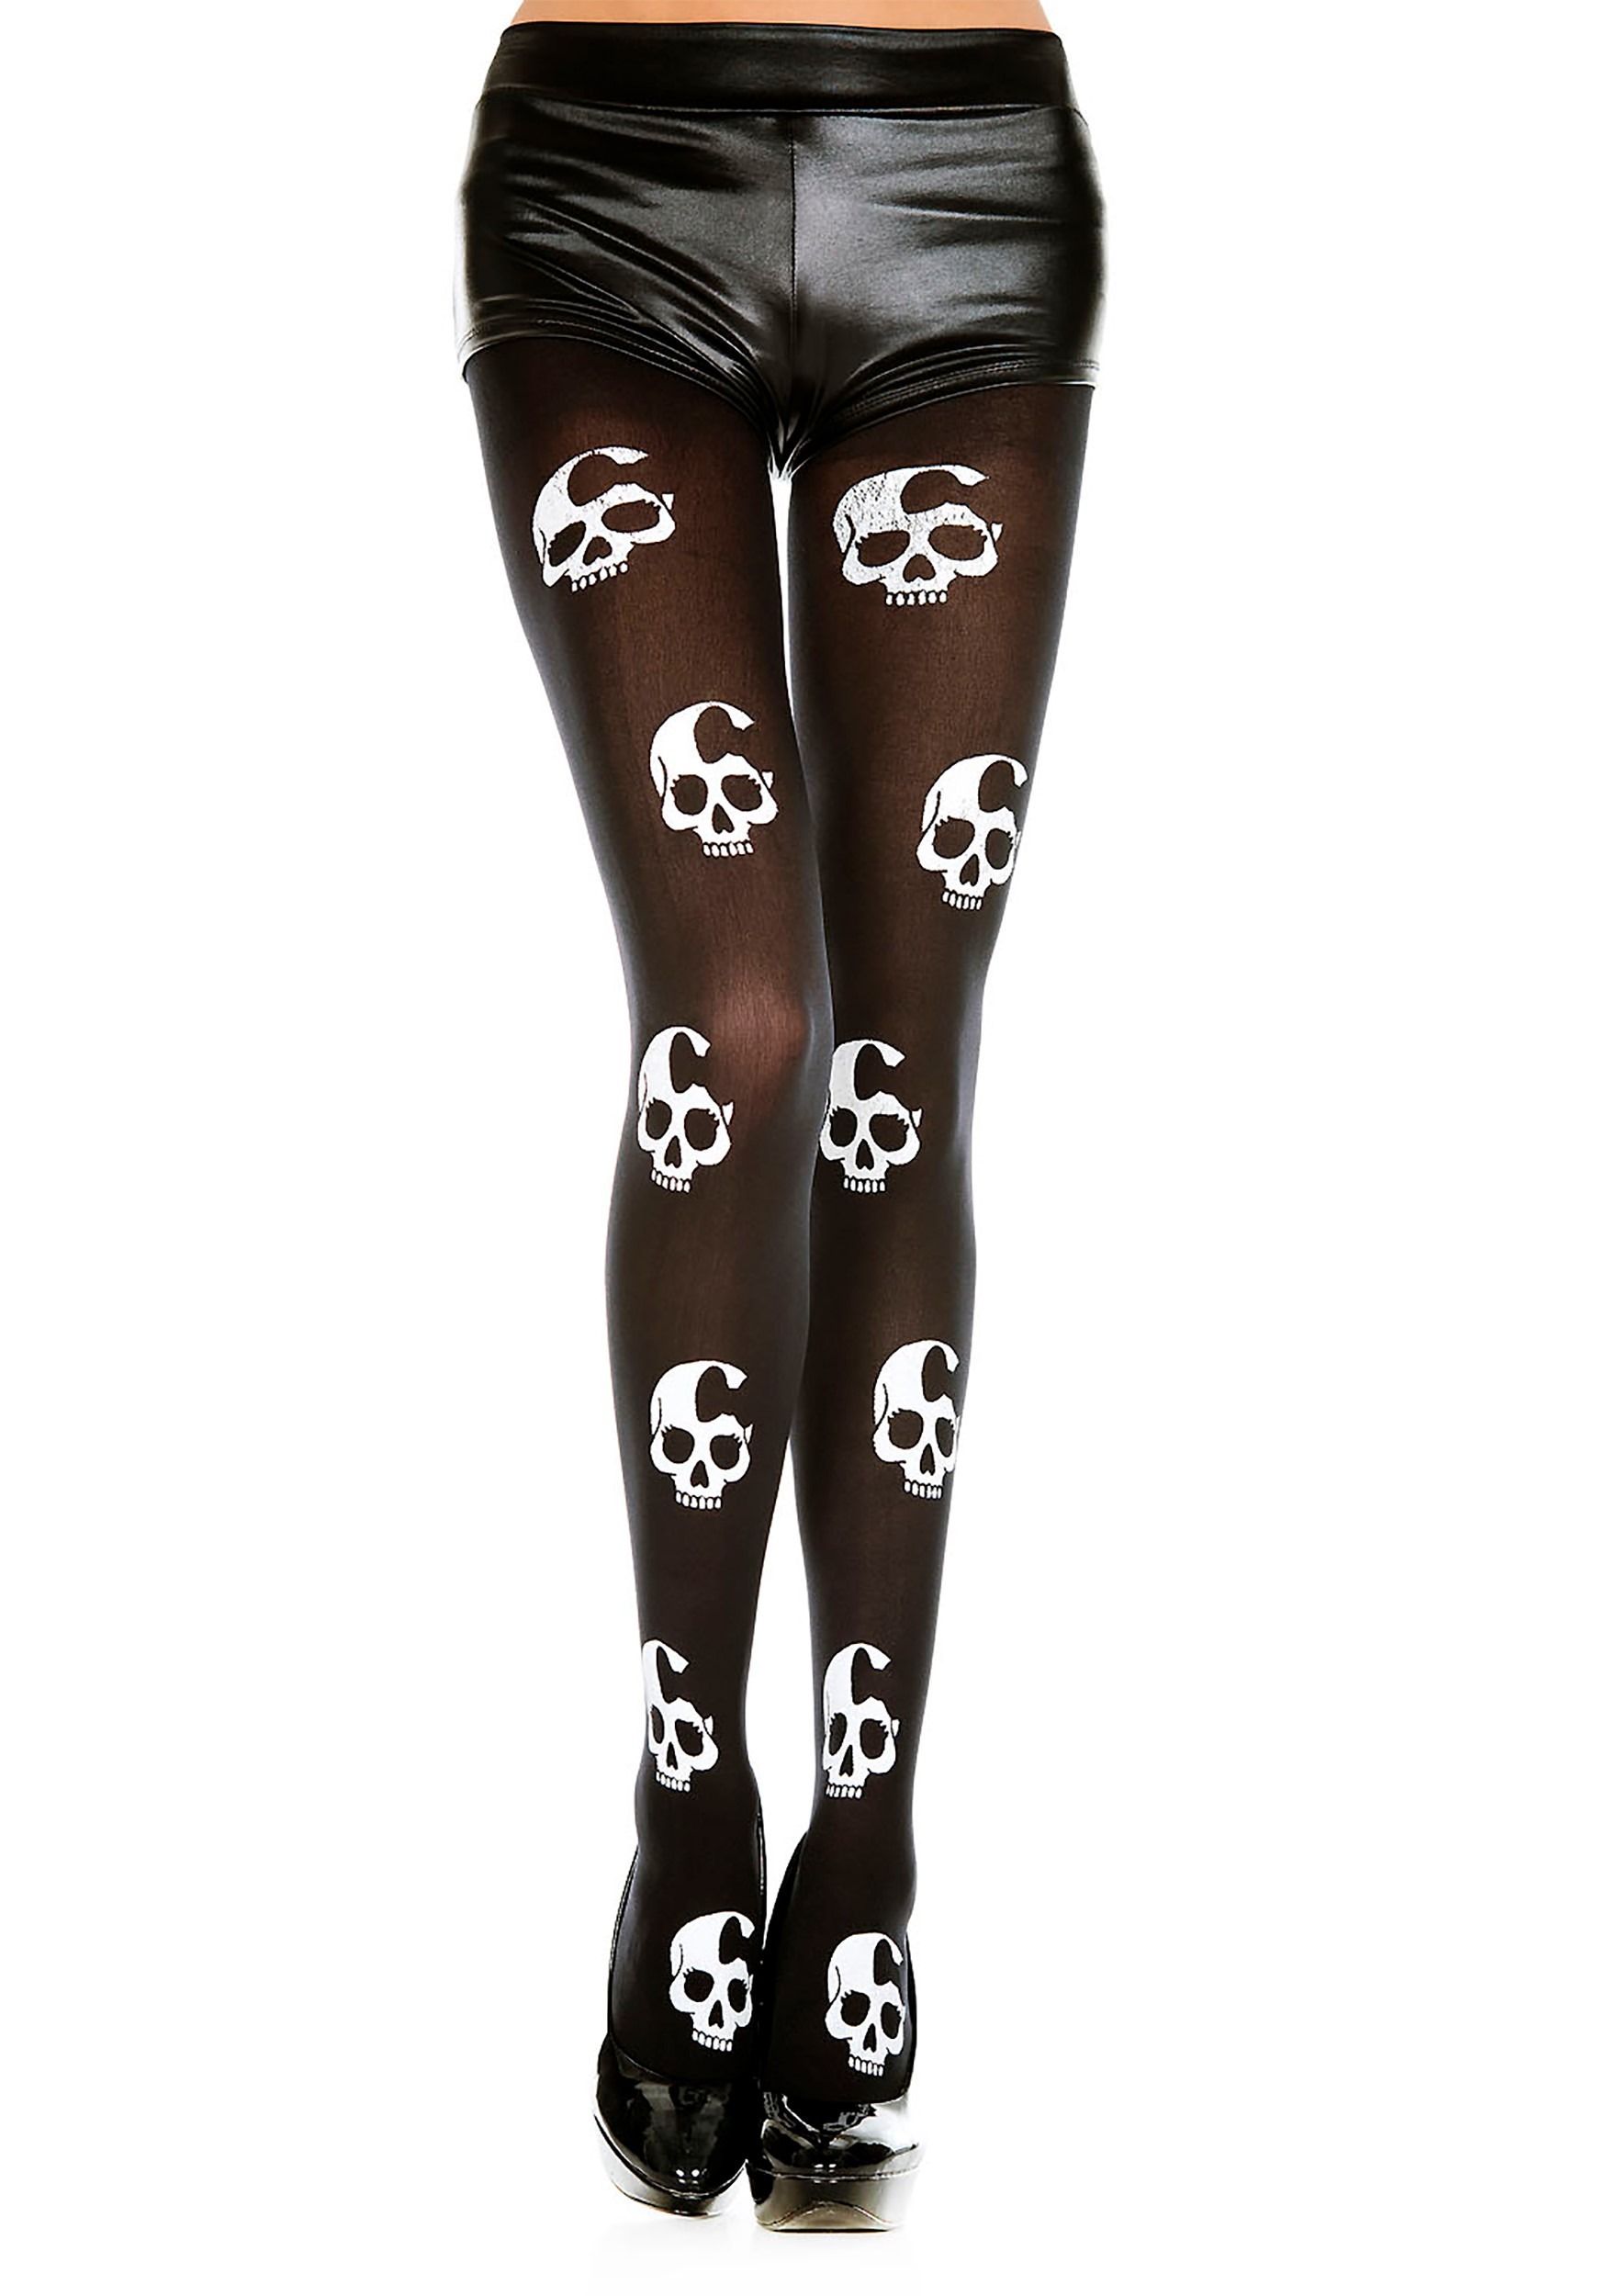 Skull Print Pirate Tights Stockings for Adult Costume